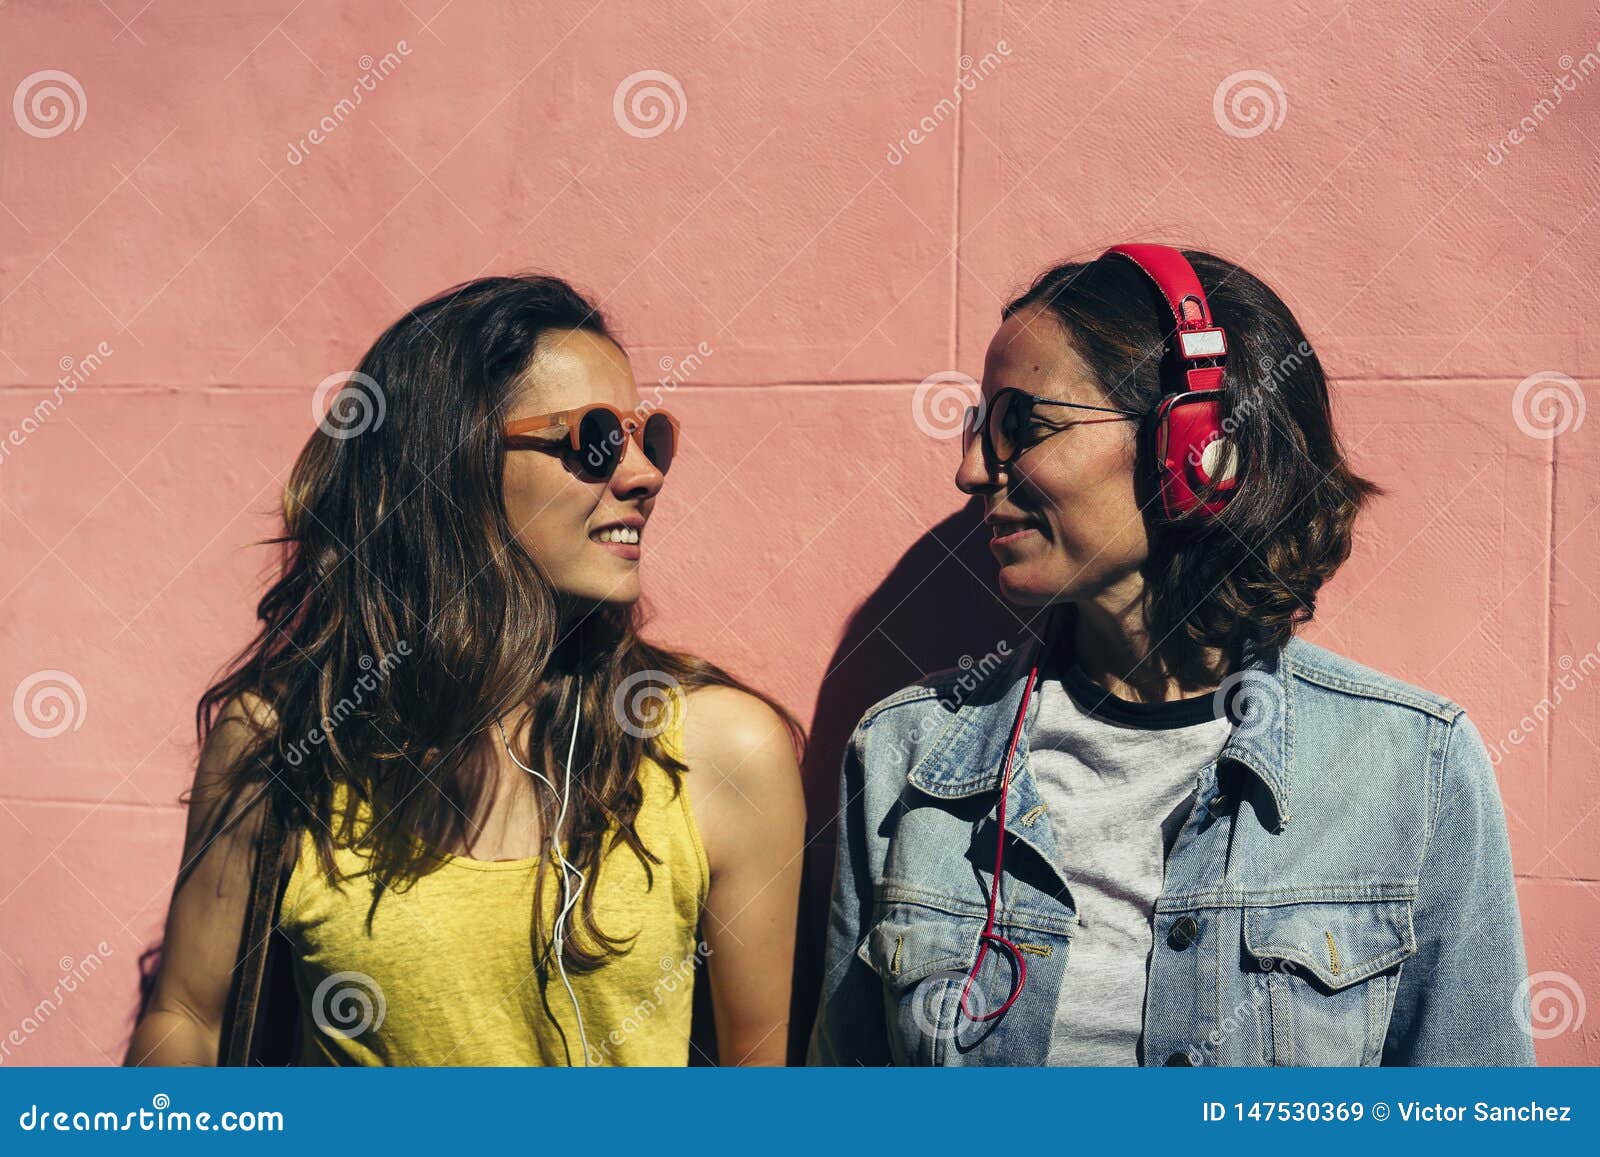 Female Couple Listening Music and Spending Time Together in a Pink Wall